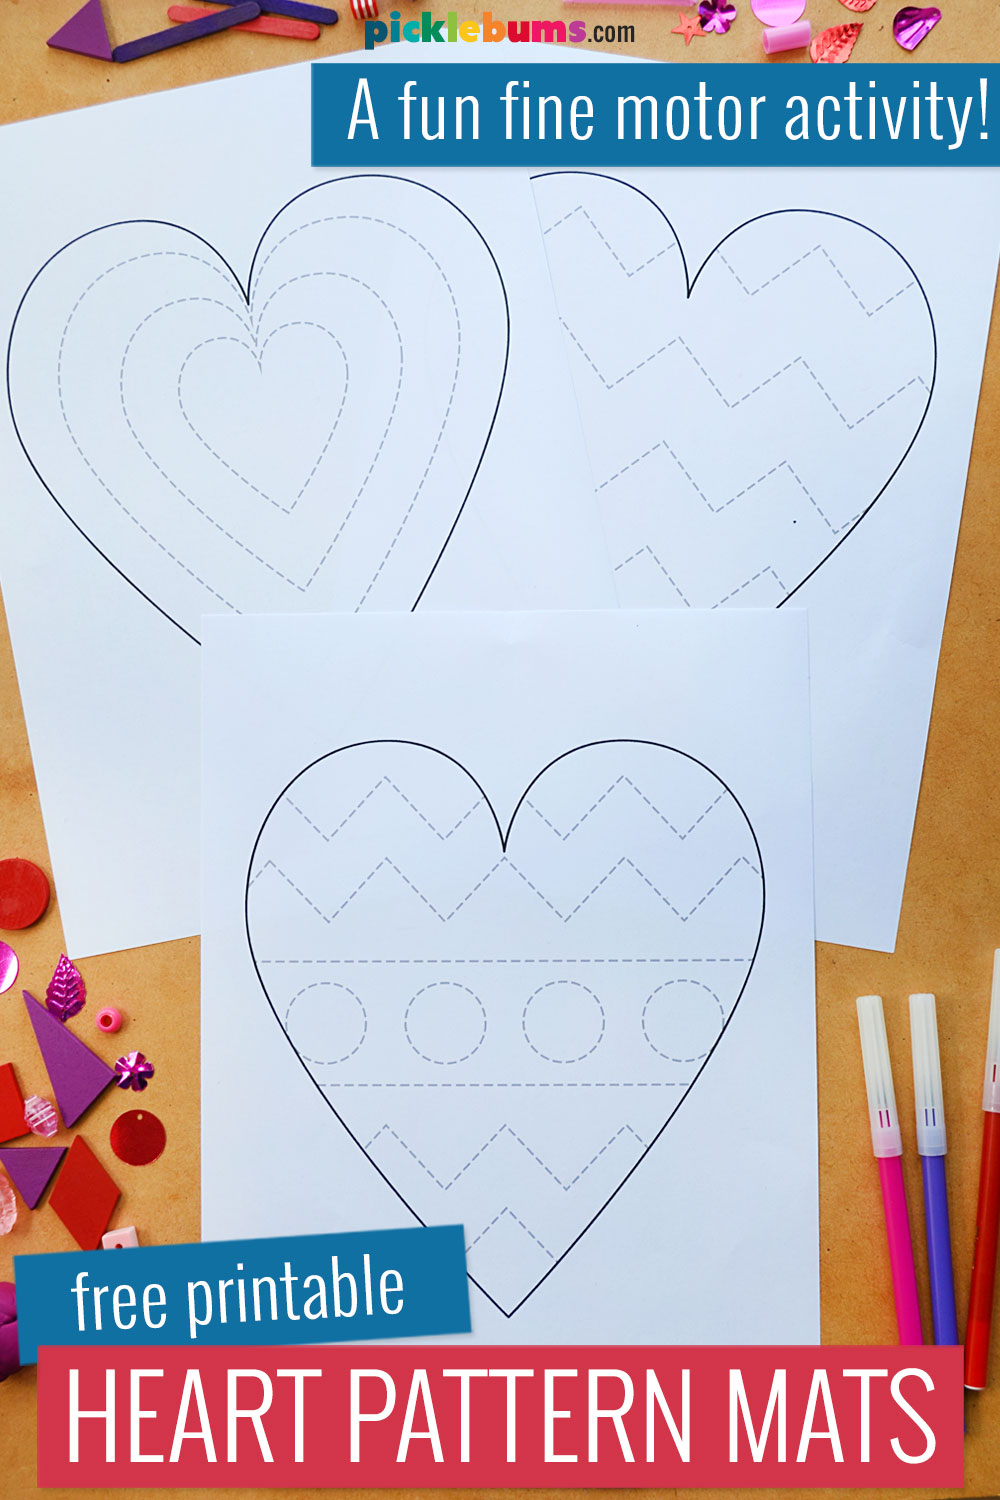 printable heart fine motor pattern mats with loose parts and markers